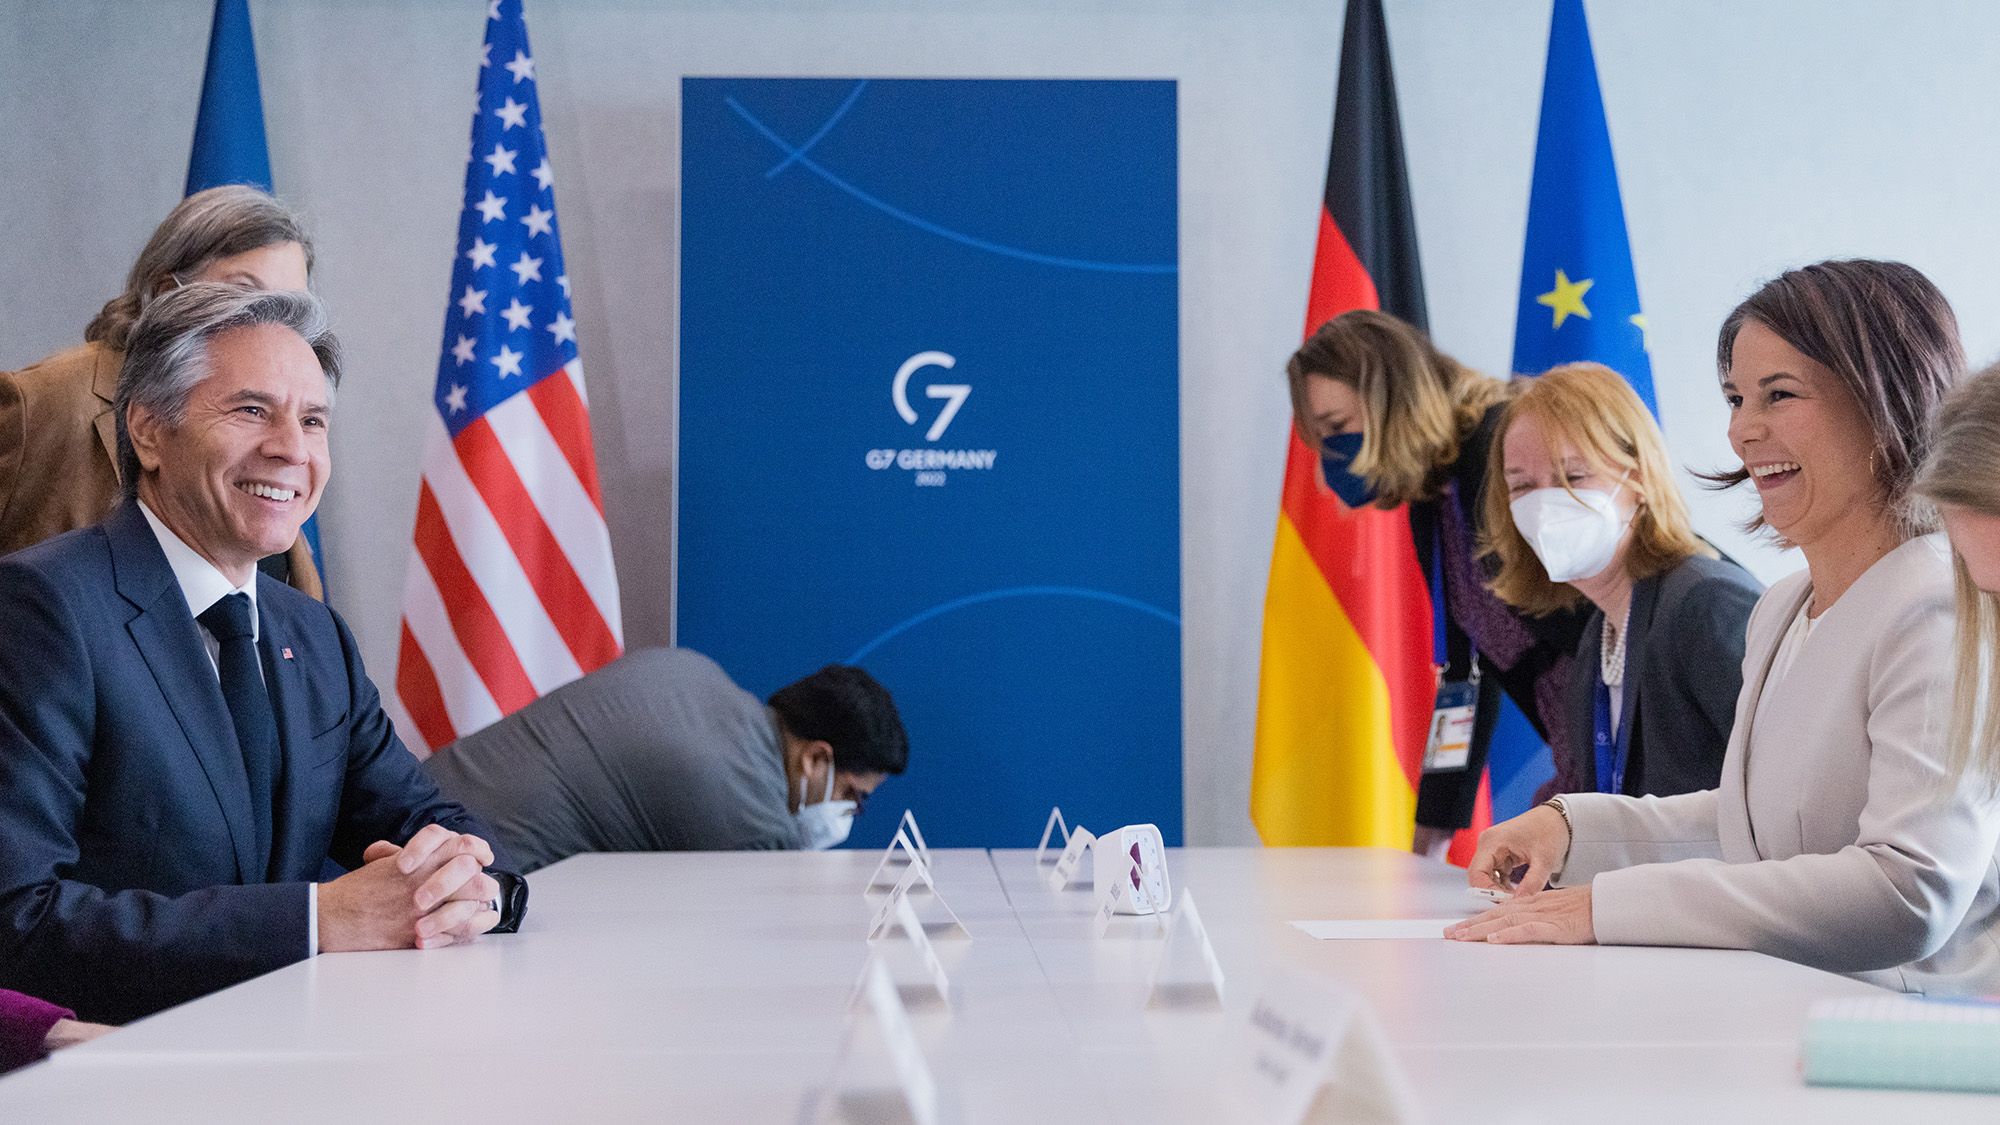 German Foreign Minister Annalena Baerbock, right, meets Antony Blinken, US Secretary of State, left, for talks at the meeting of G7 foreign ministers in Münster, Germany, on November 3.